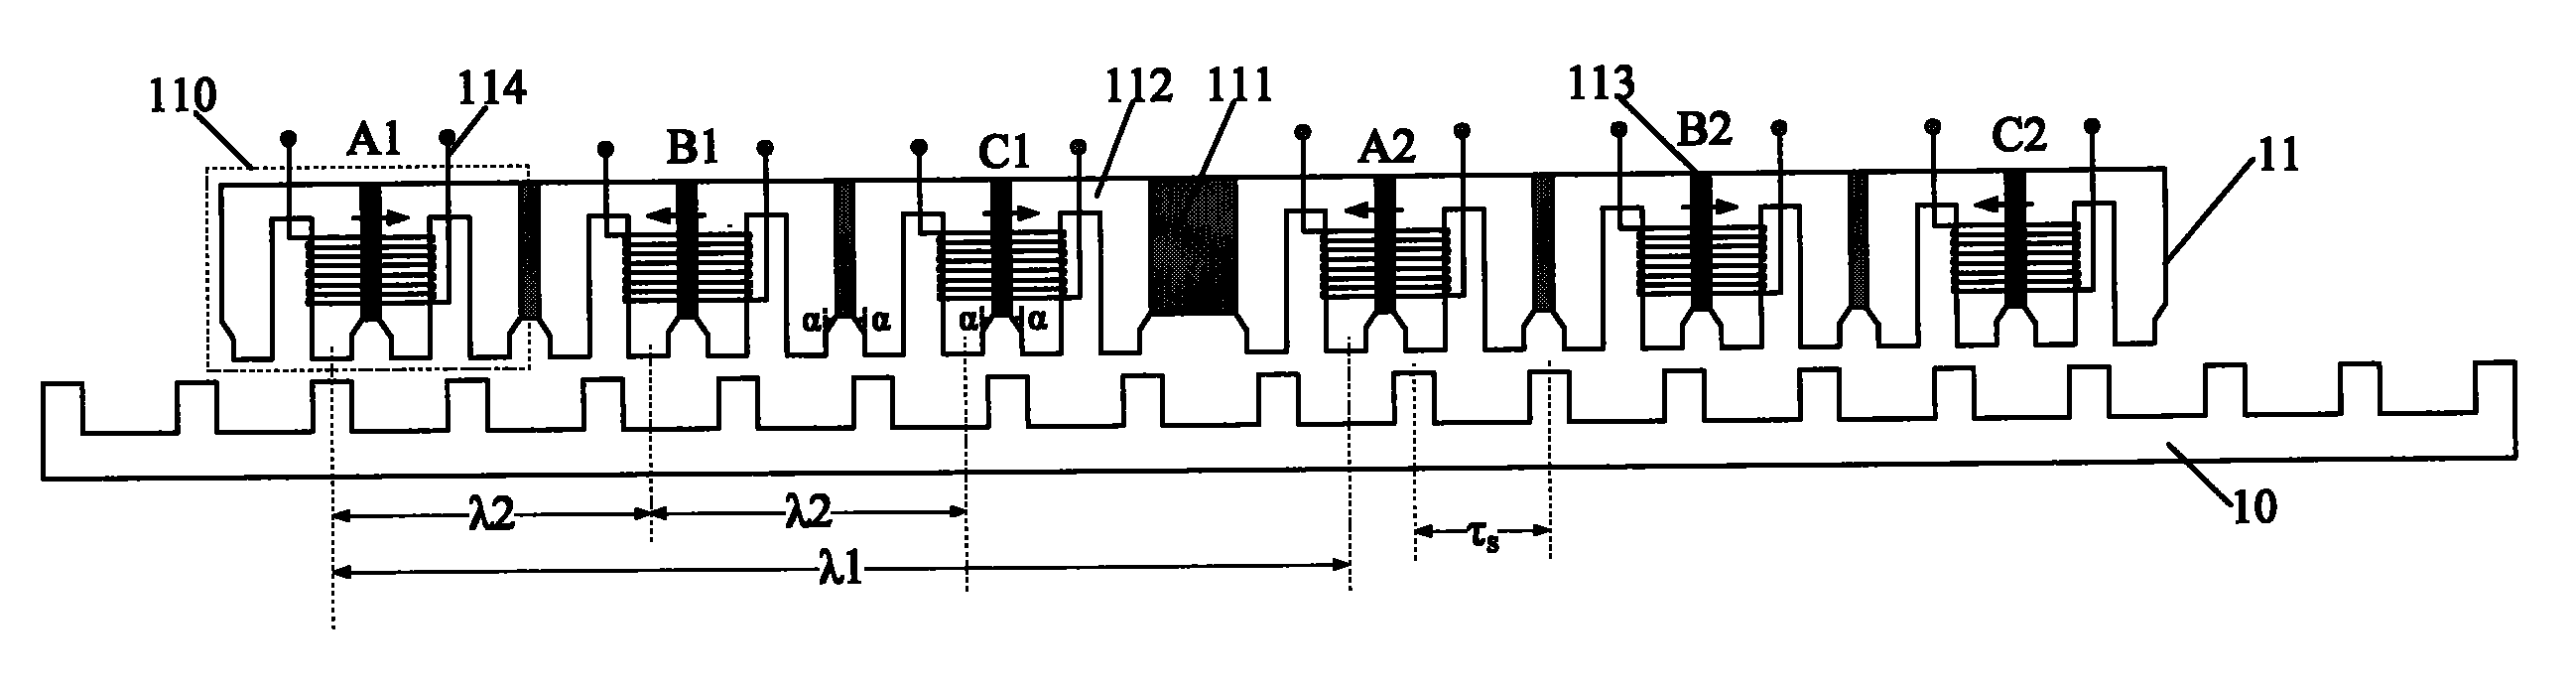 Complementary type modularization permanent-magnetism linear motor and motor die set formed by same